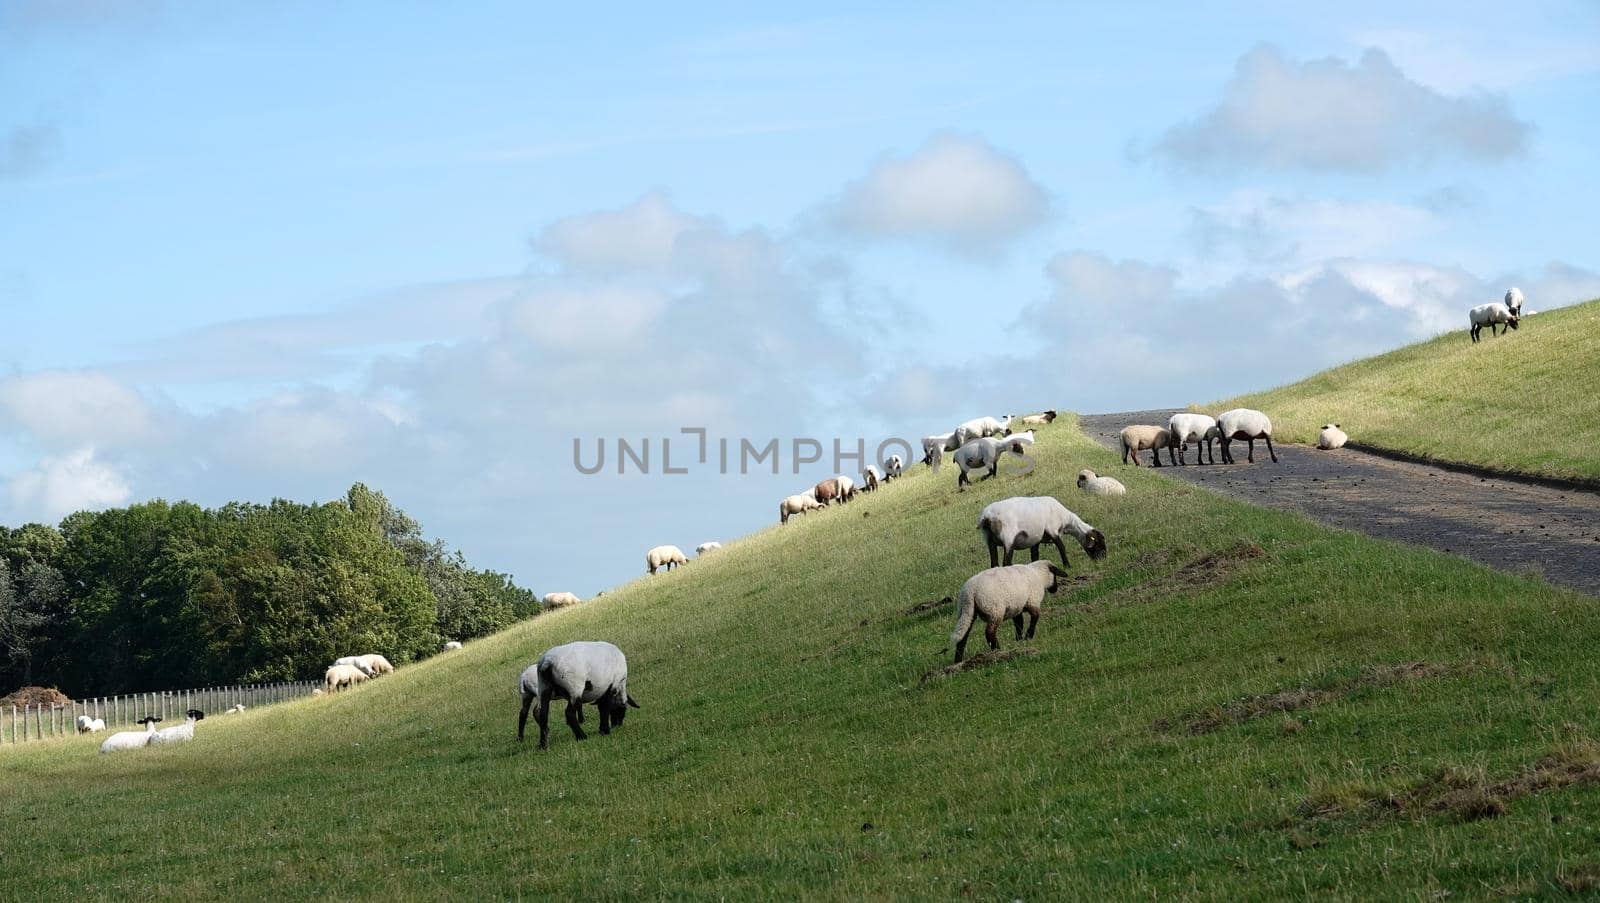 German Blackheaded Mutton sheep grazing on a dyke. In the middle of the dike is a bicycle path. This image is typical of East Frisia in Germany.